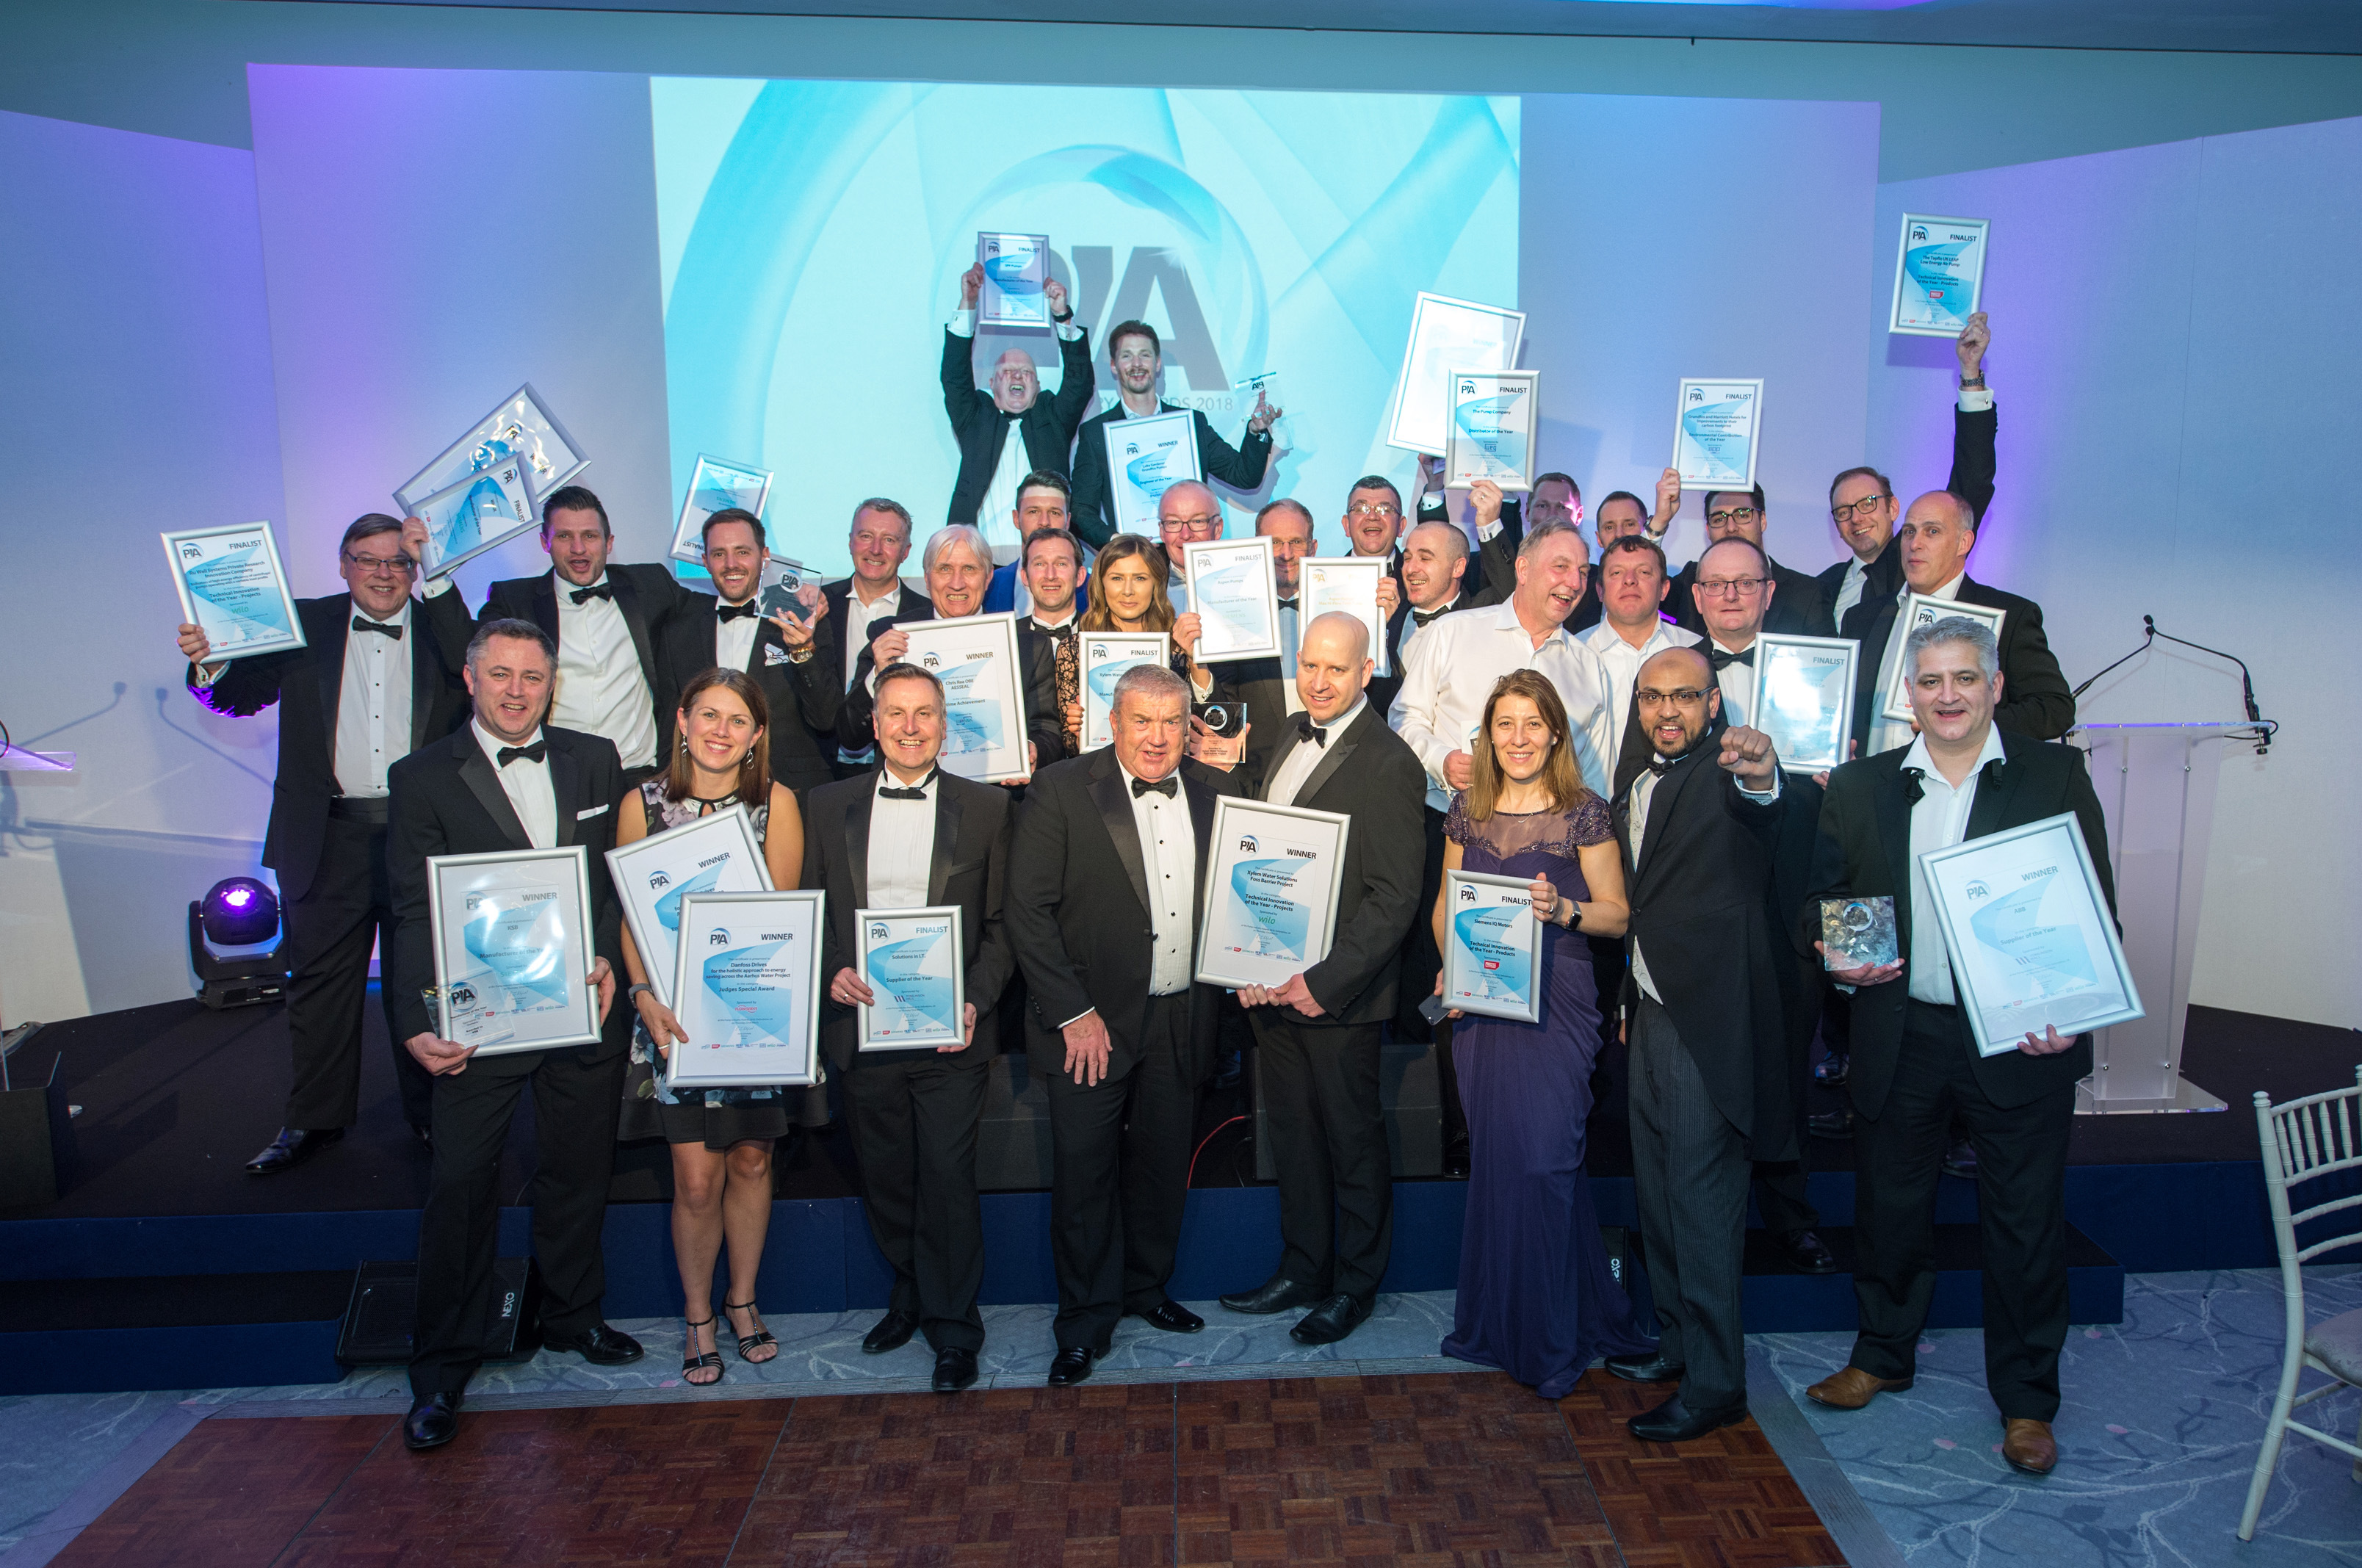 Winners and finalists of the 2018 Pump Industry Awards.